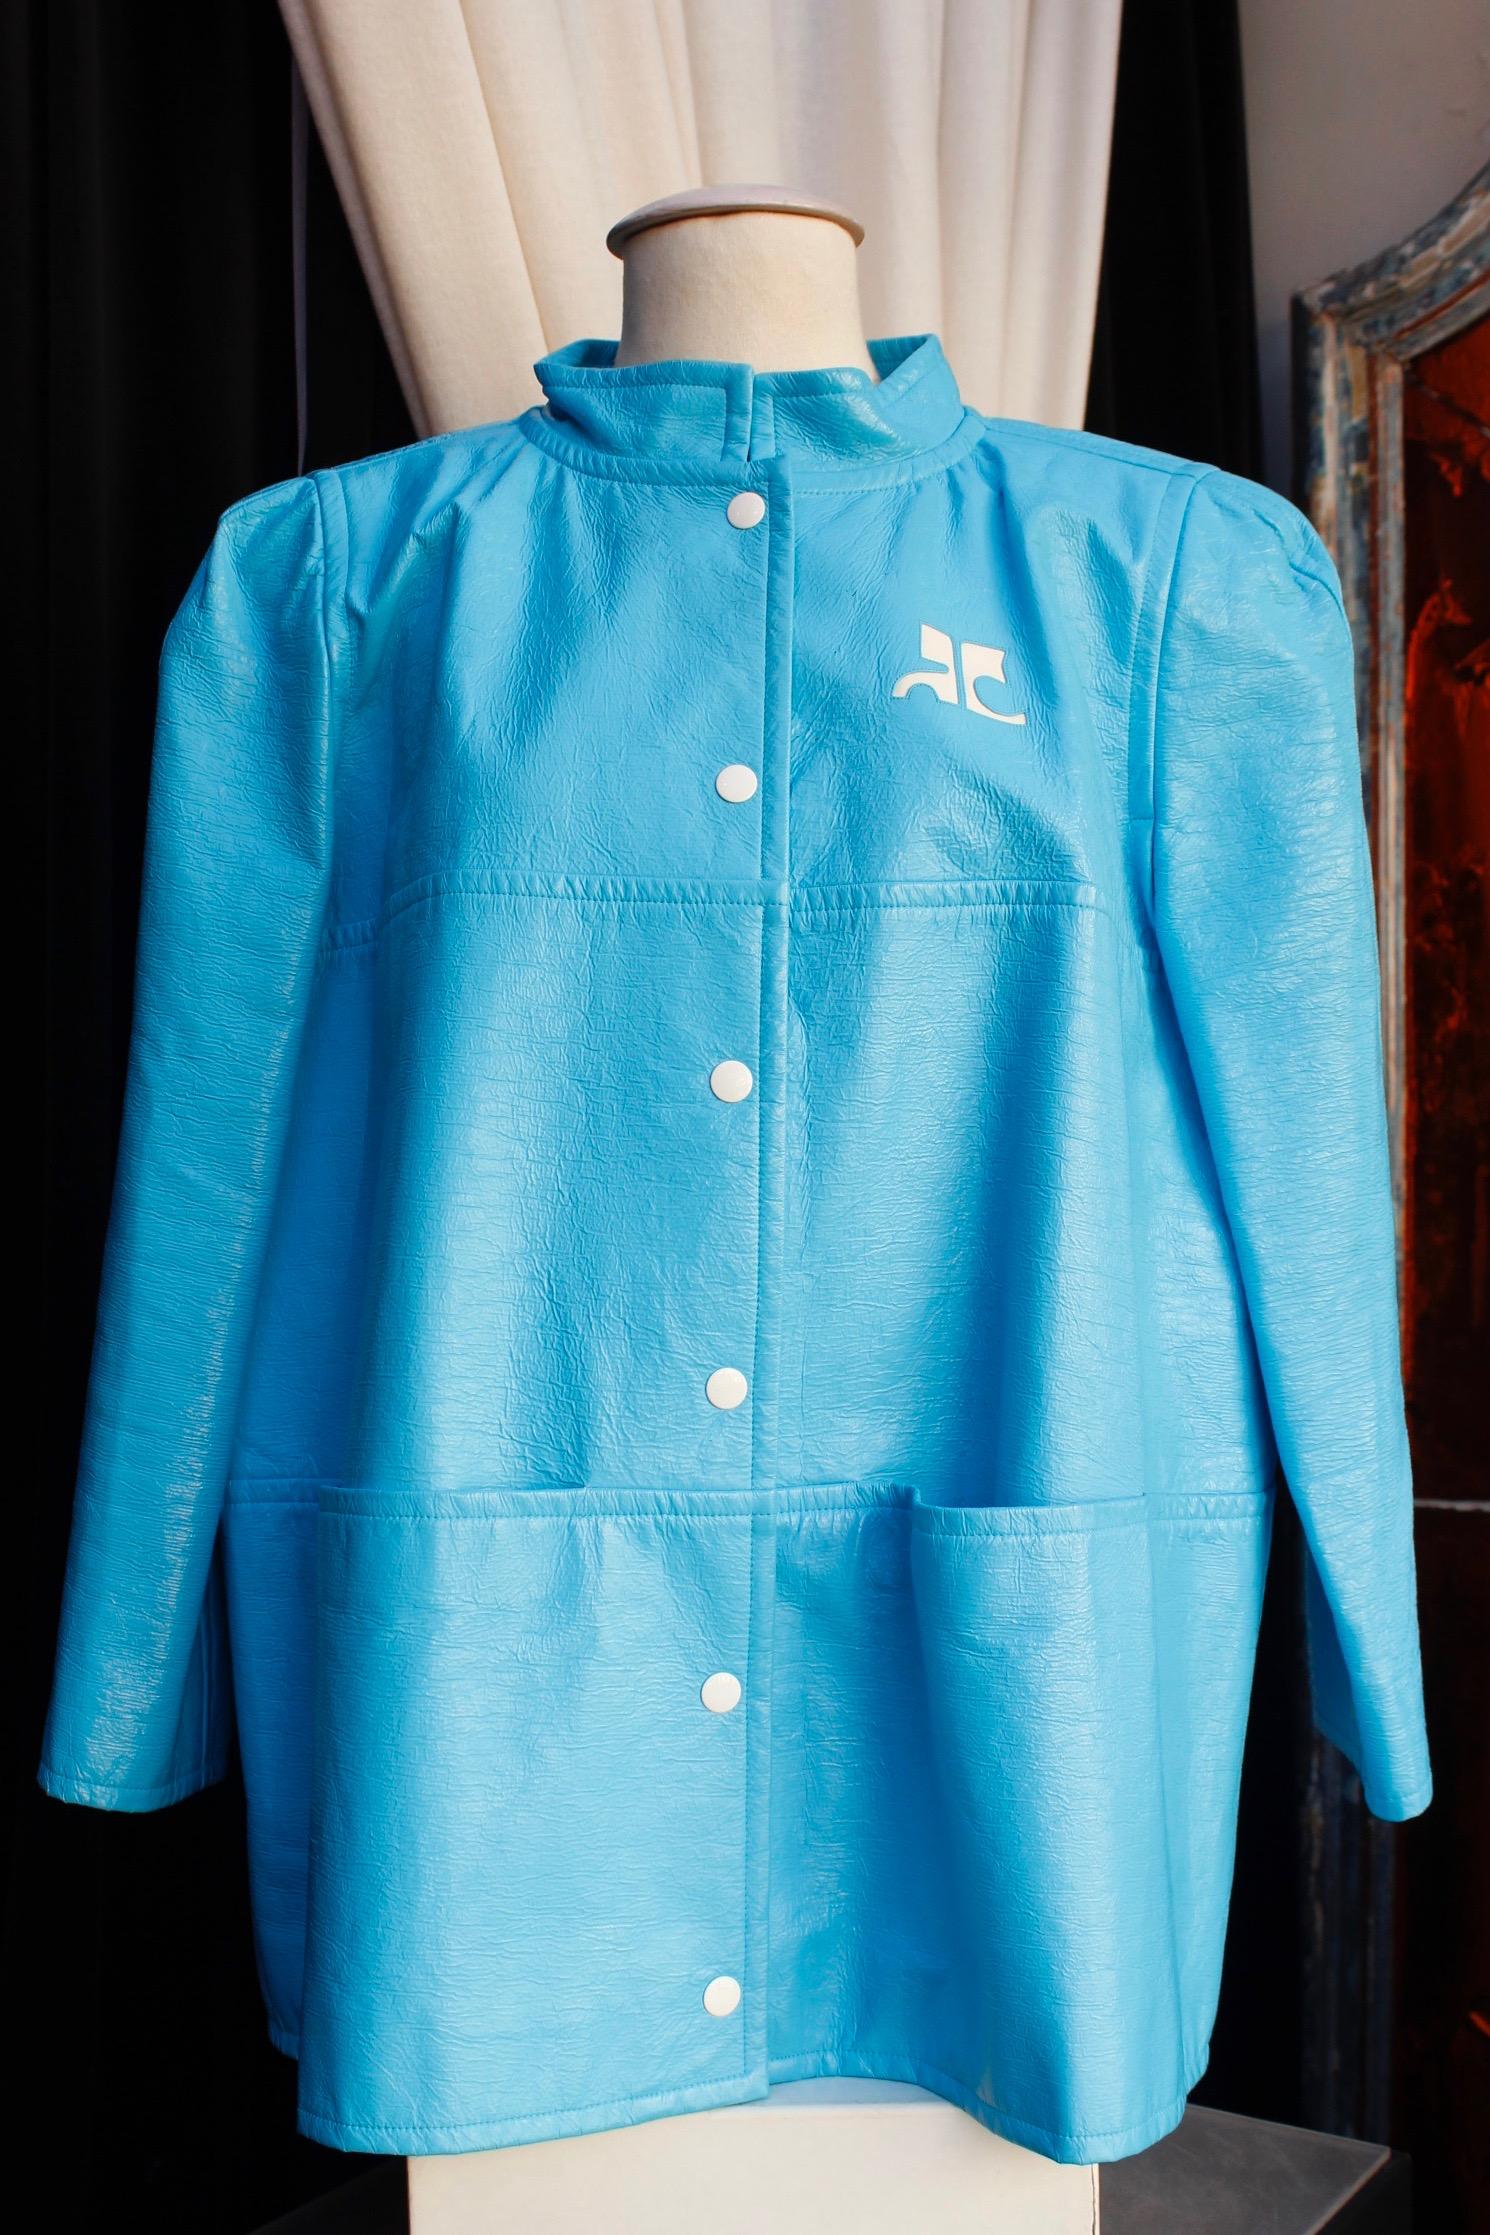 COURREGES (Paris) Iconic jacket composed of light blue vinyle with a series of white snaps,  and two patch pockets. The white brand logo is visible at the bust.

The oversize jacket features a loose cut. Indicated size 36, but fits also a 38 (US